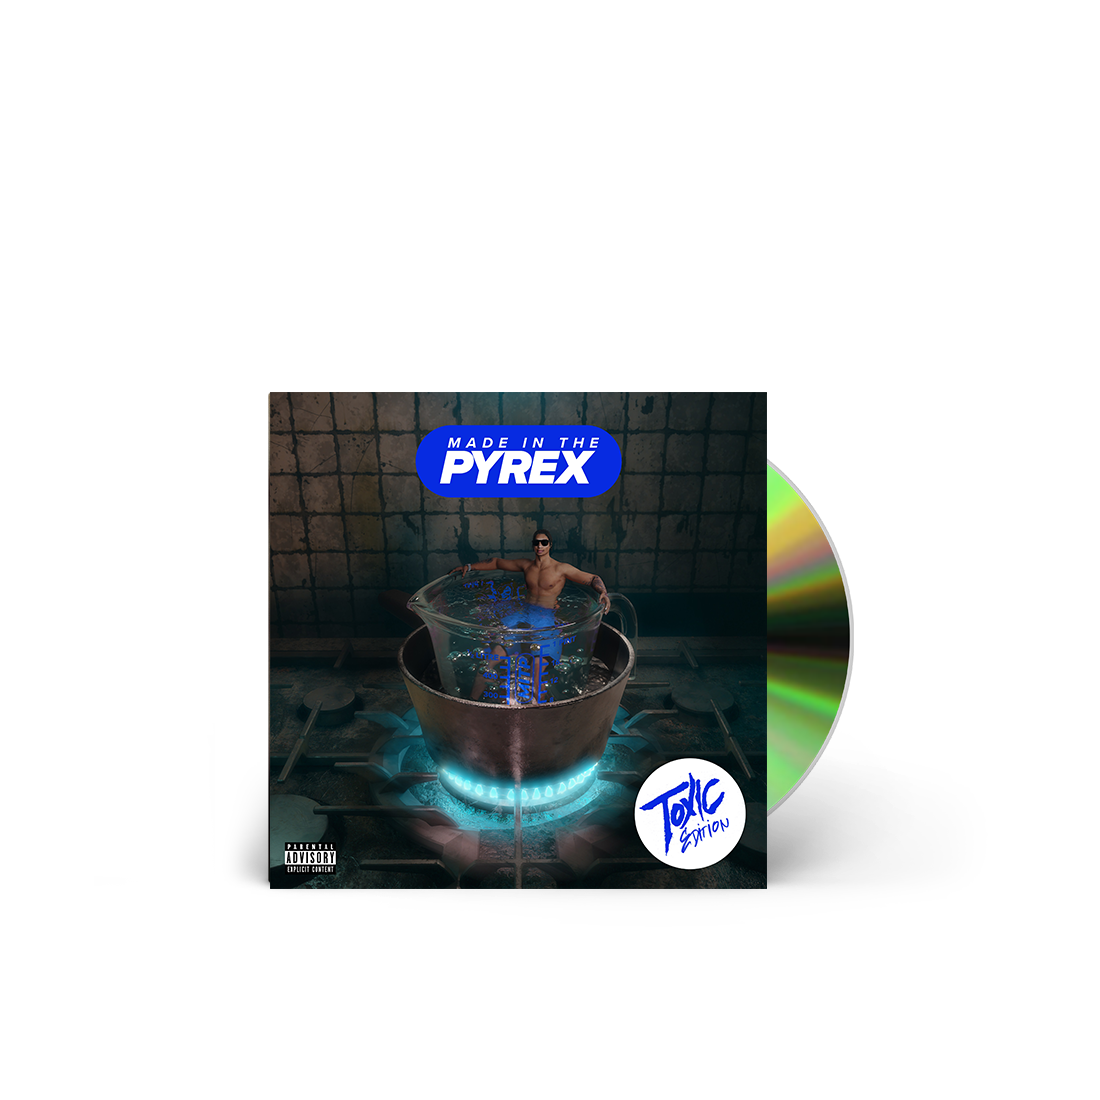 Made In The Pyrex (Toxic Edition): CD